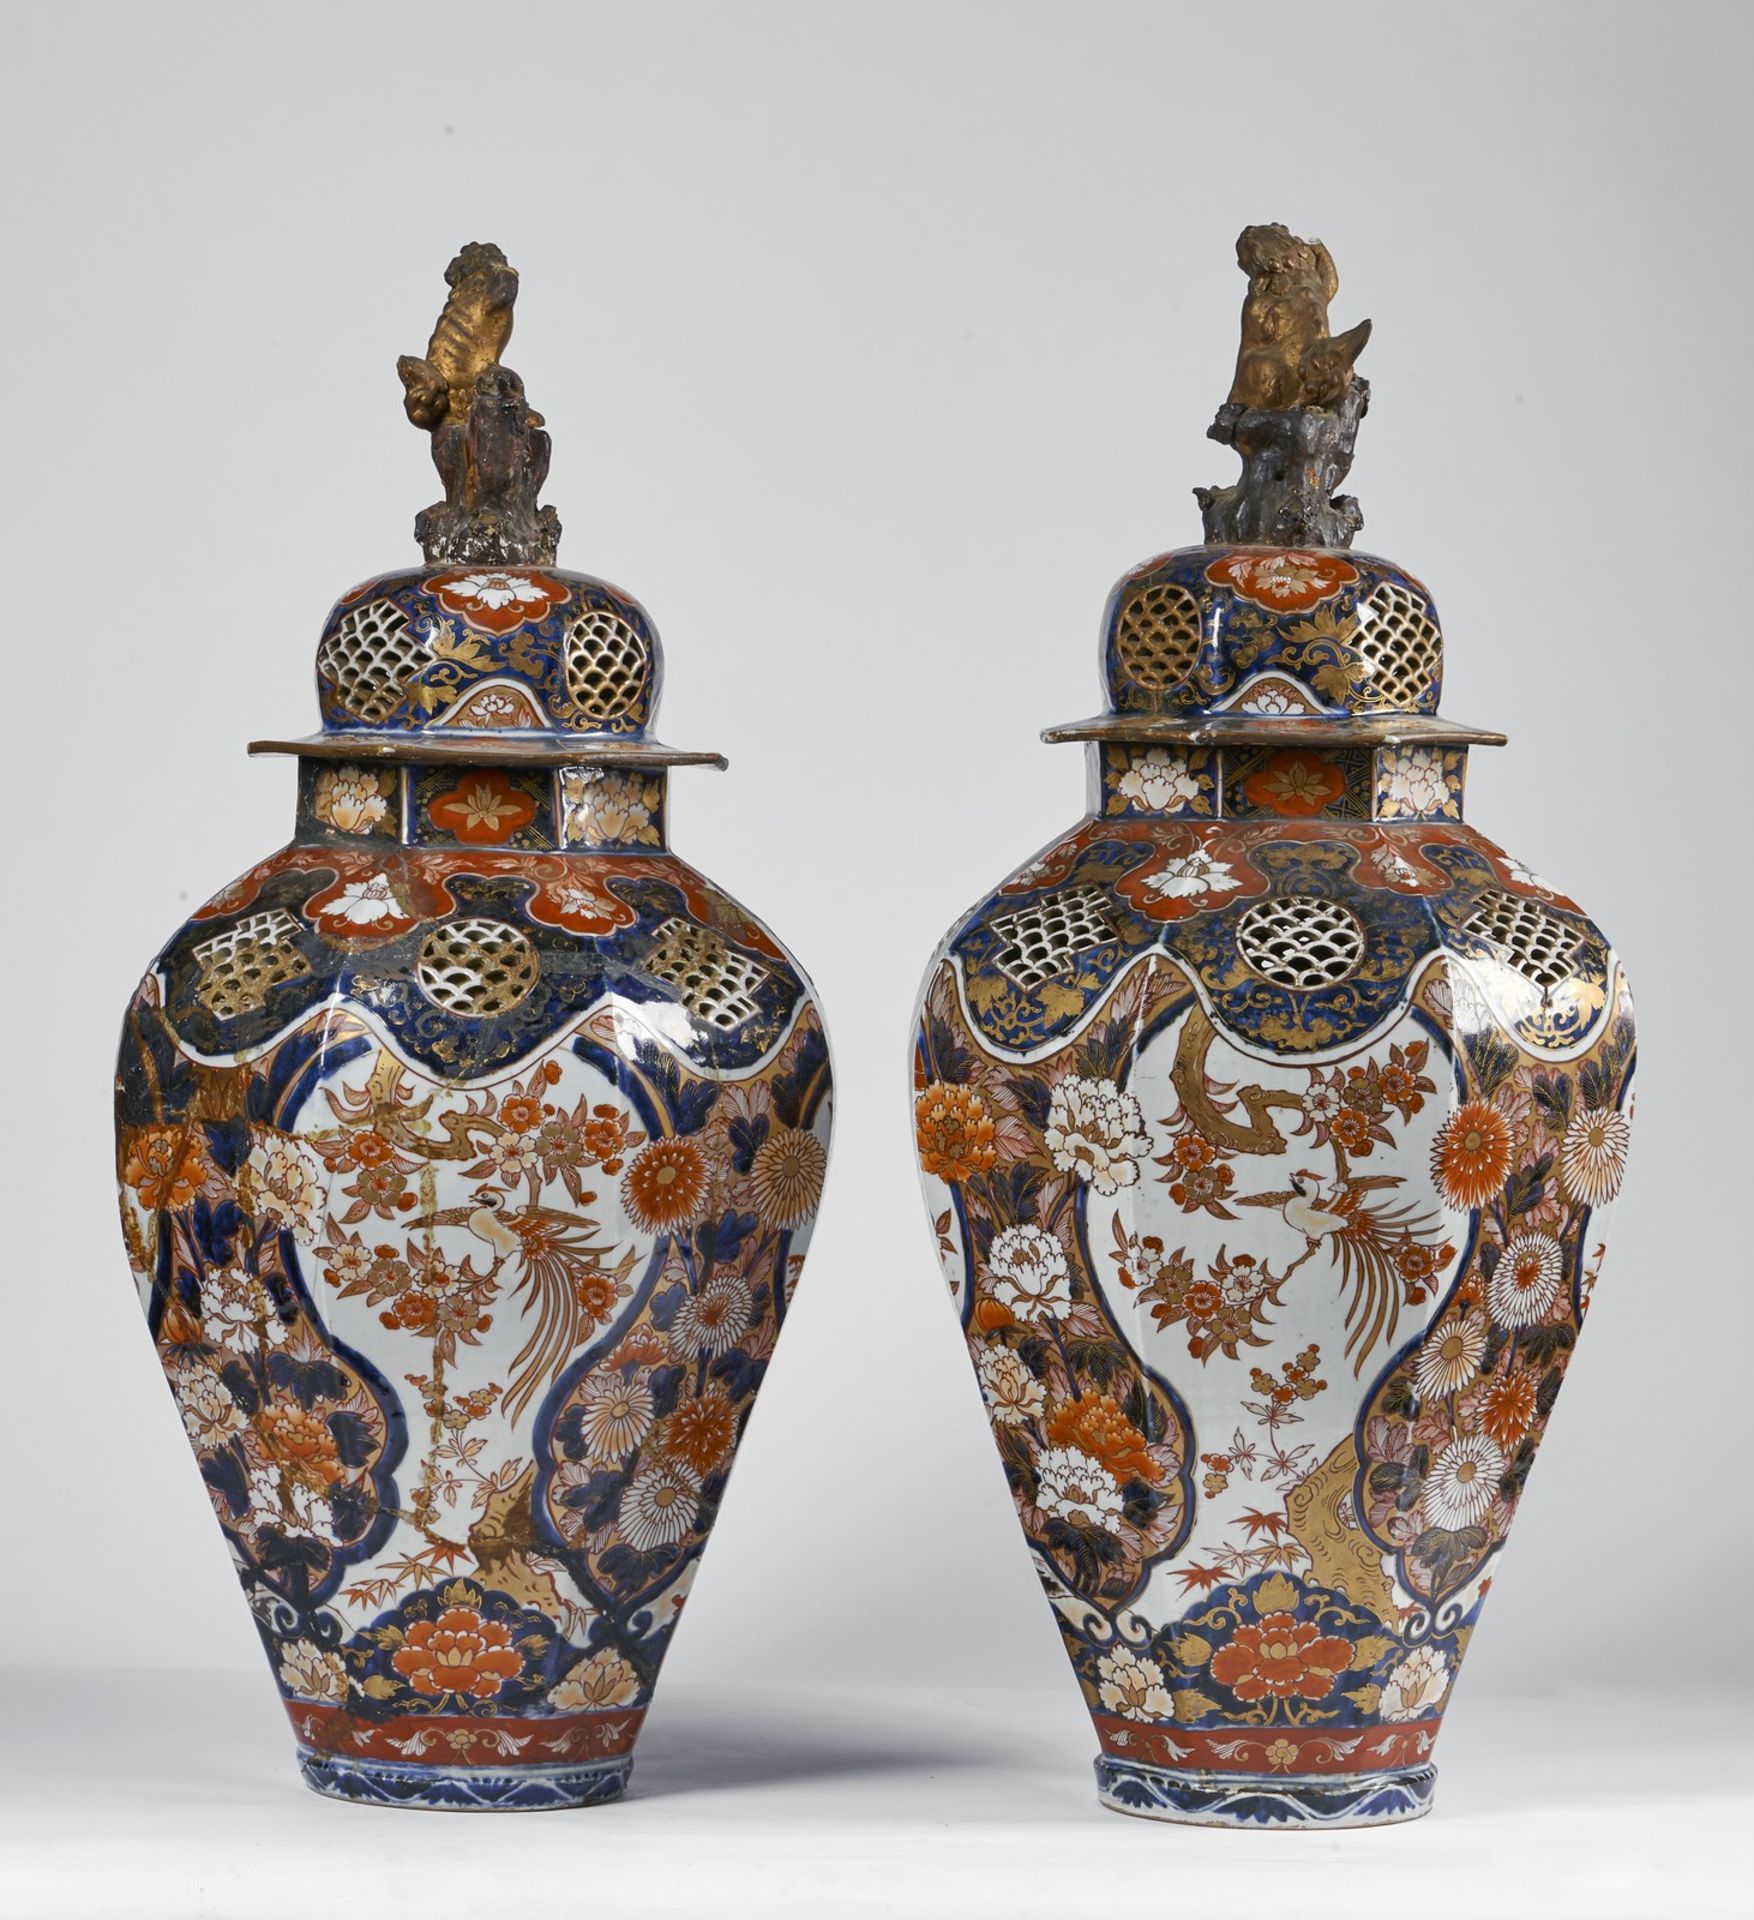 ARTE GIAPPONESE A pair of large Imari porcelain vases and covers Japan, 18th century . - Bild 3 aus 4